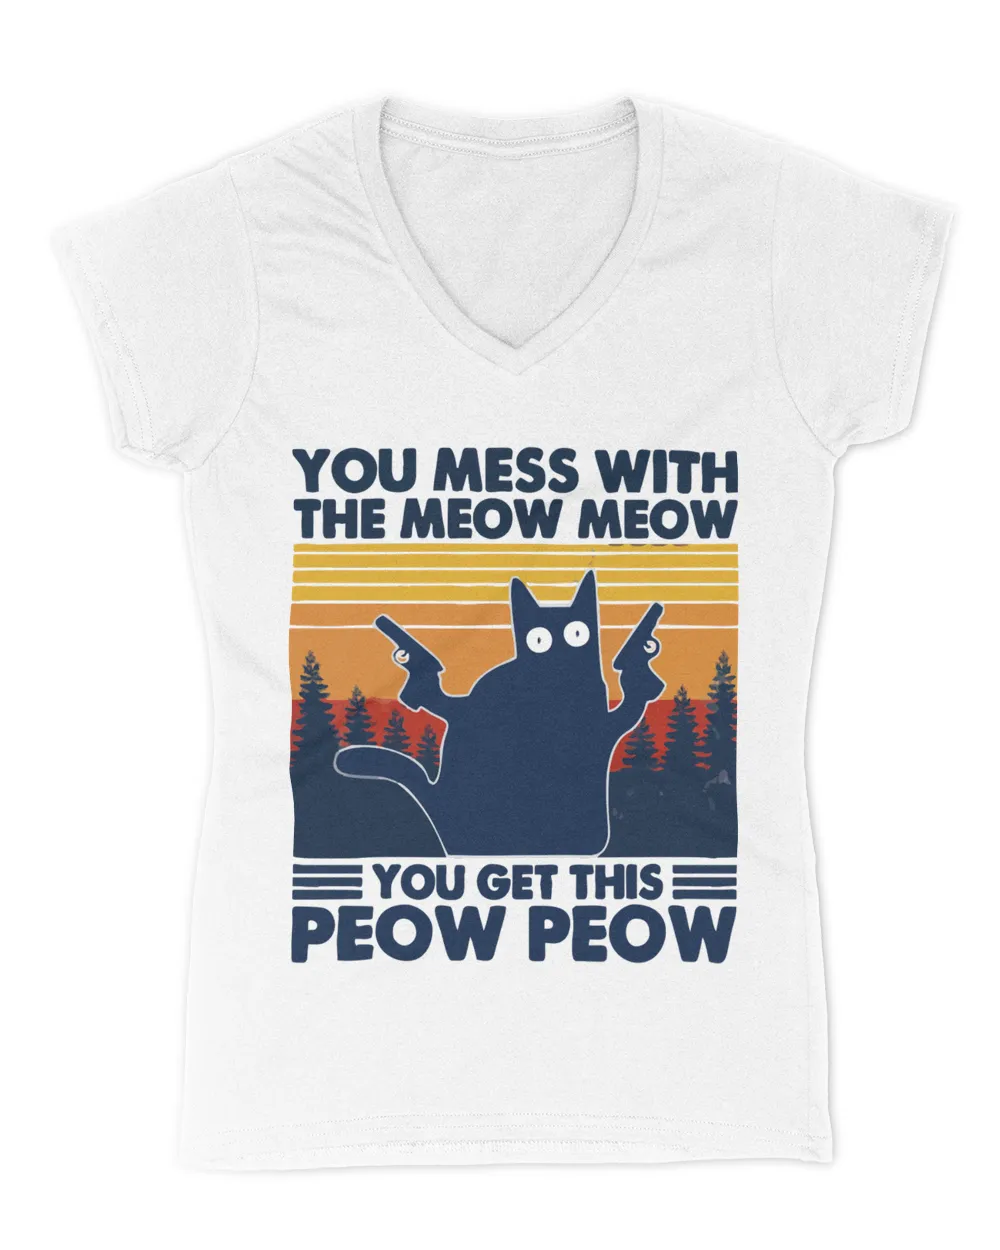 You mess with the meow meow